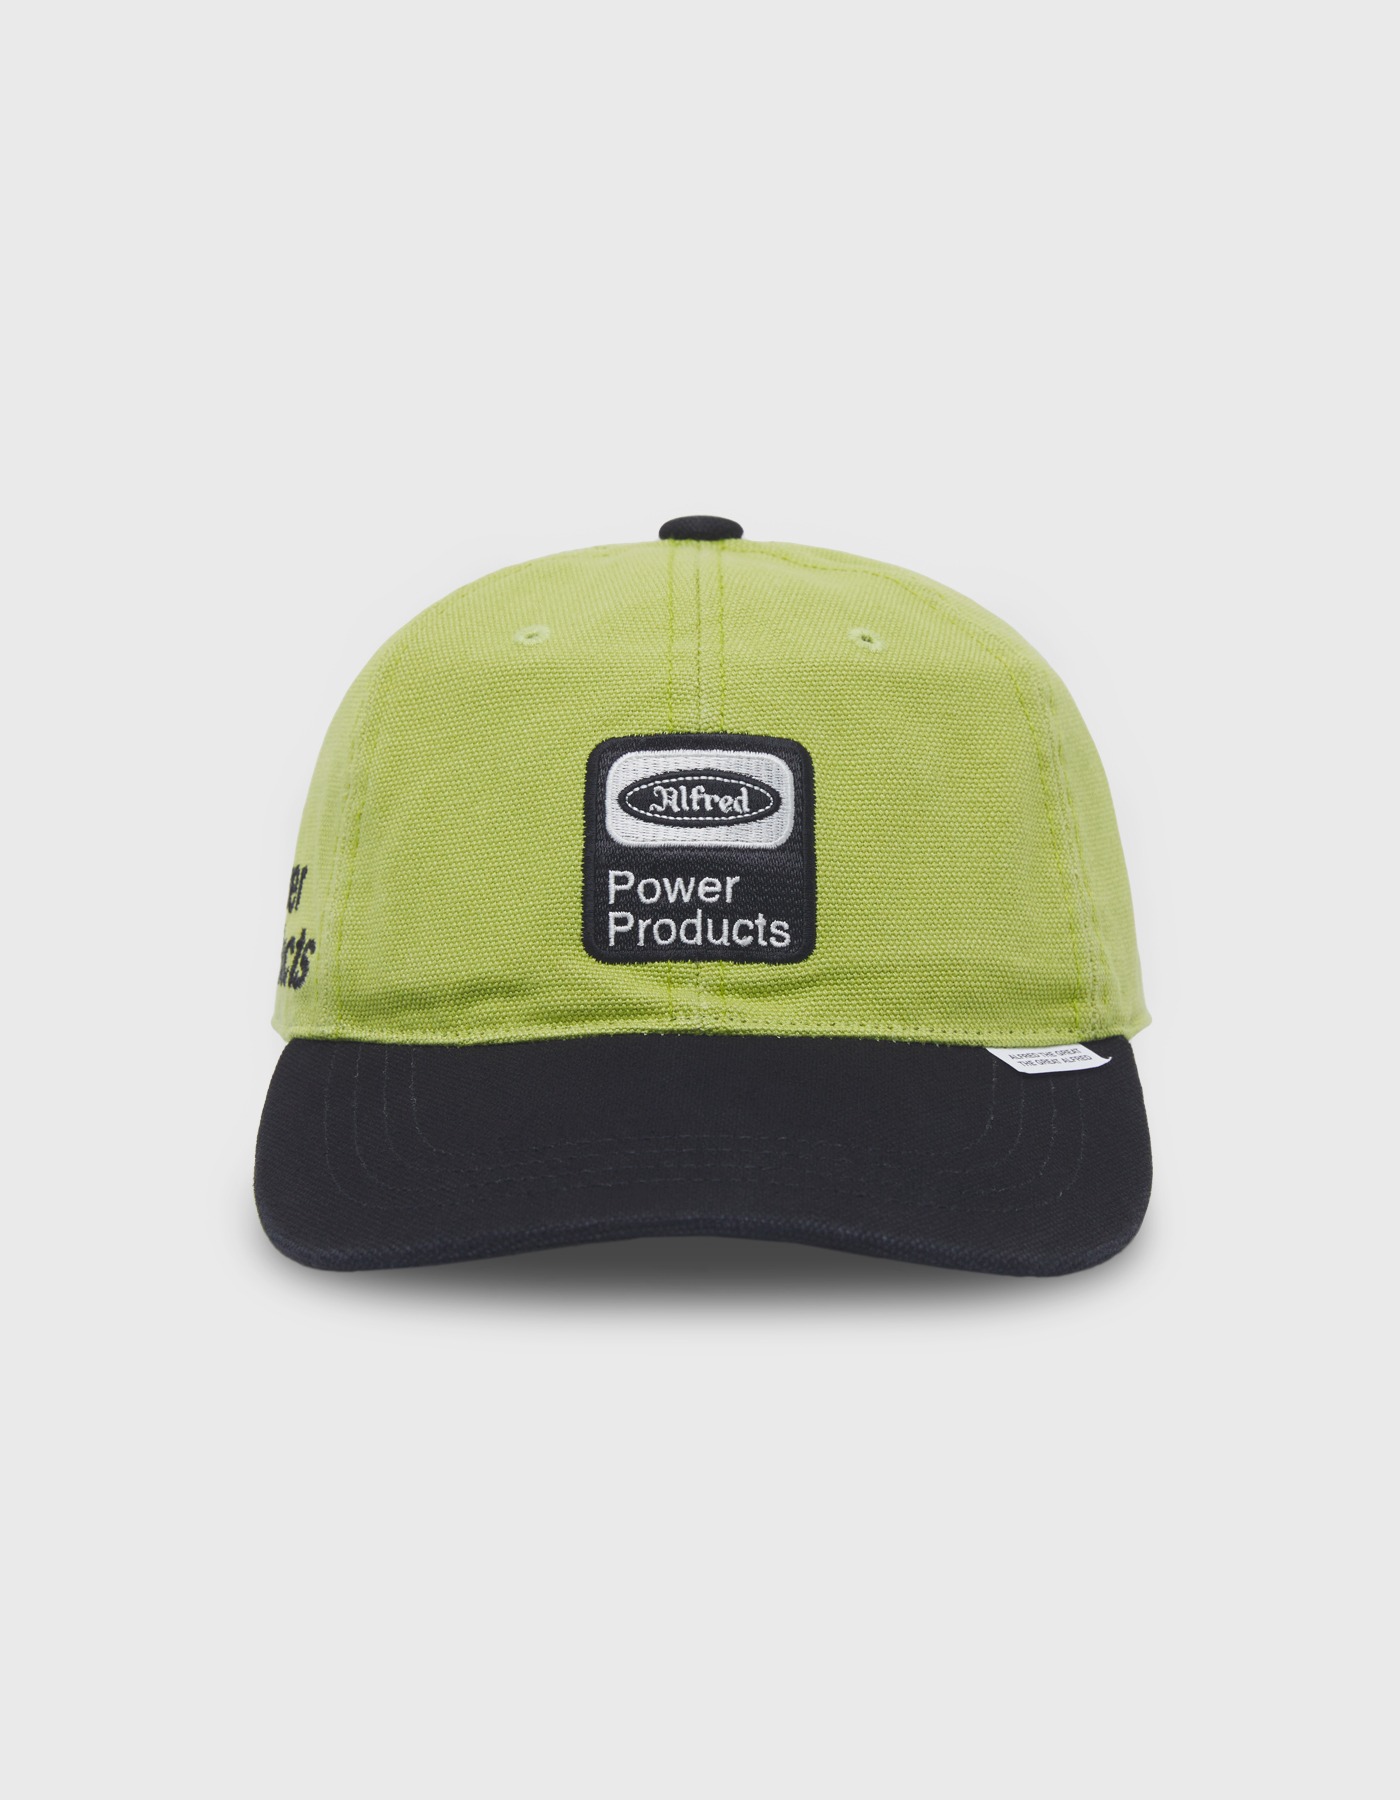 POWER PRODUCTS CAP / Yellow Green-Black